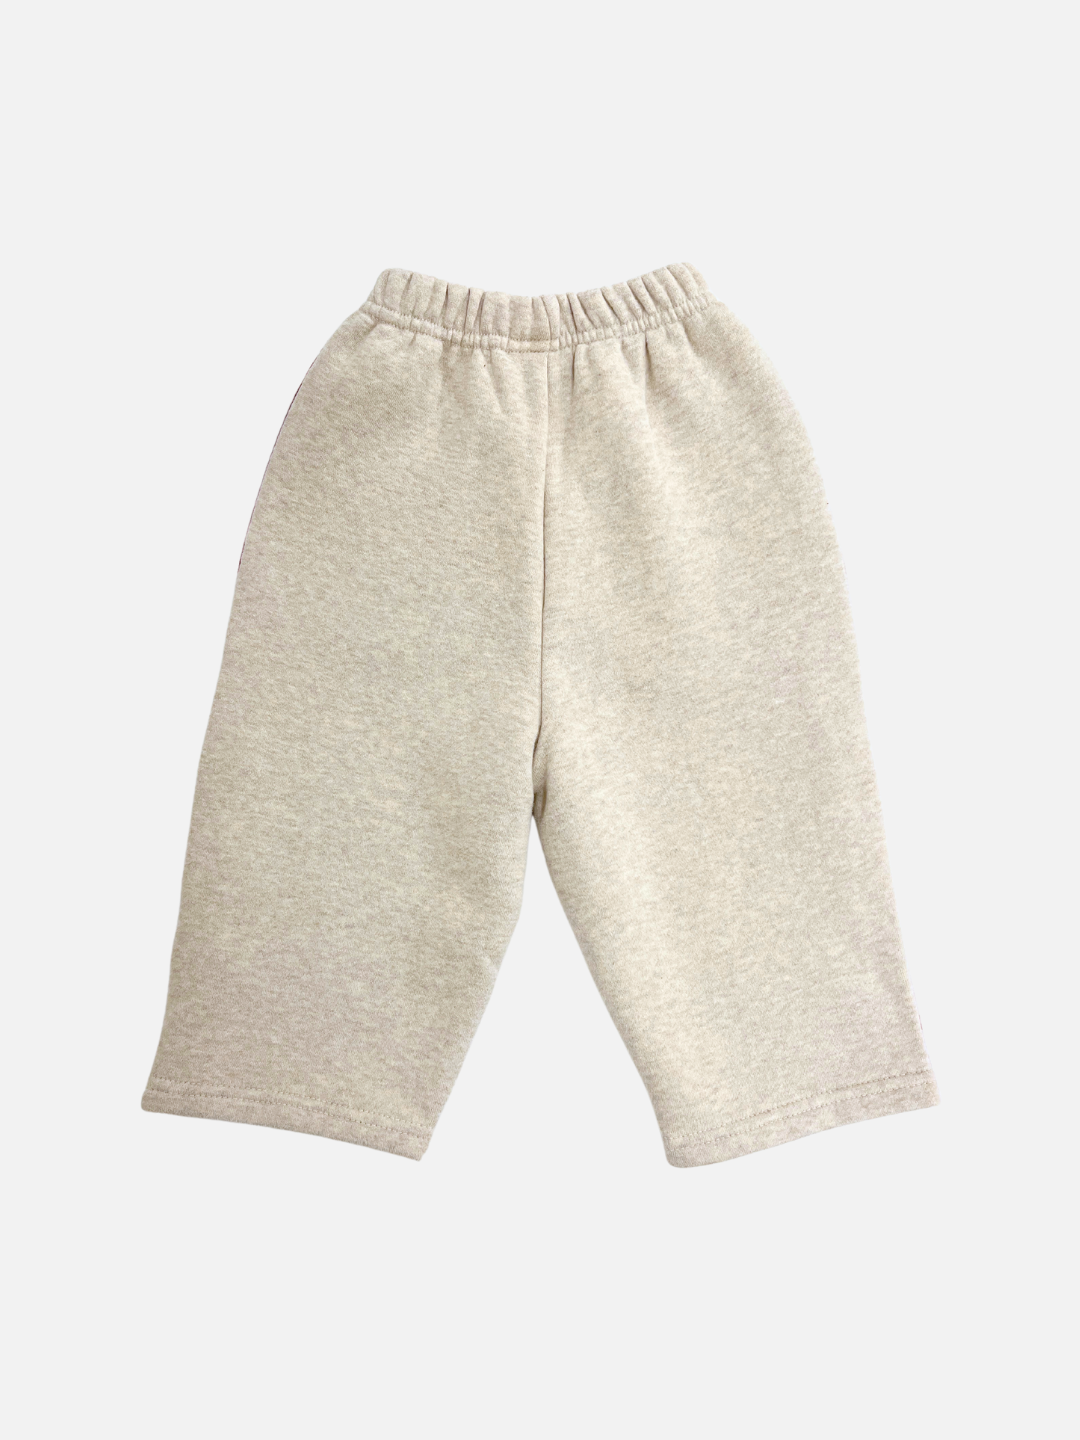 A back view of the kid's Varsity Pant in Oatmeal.